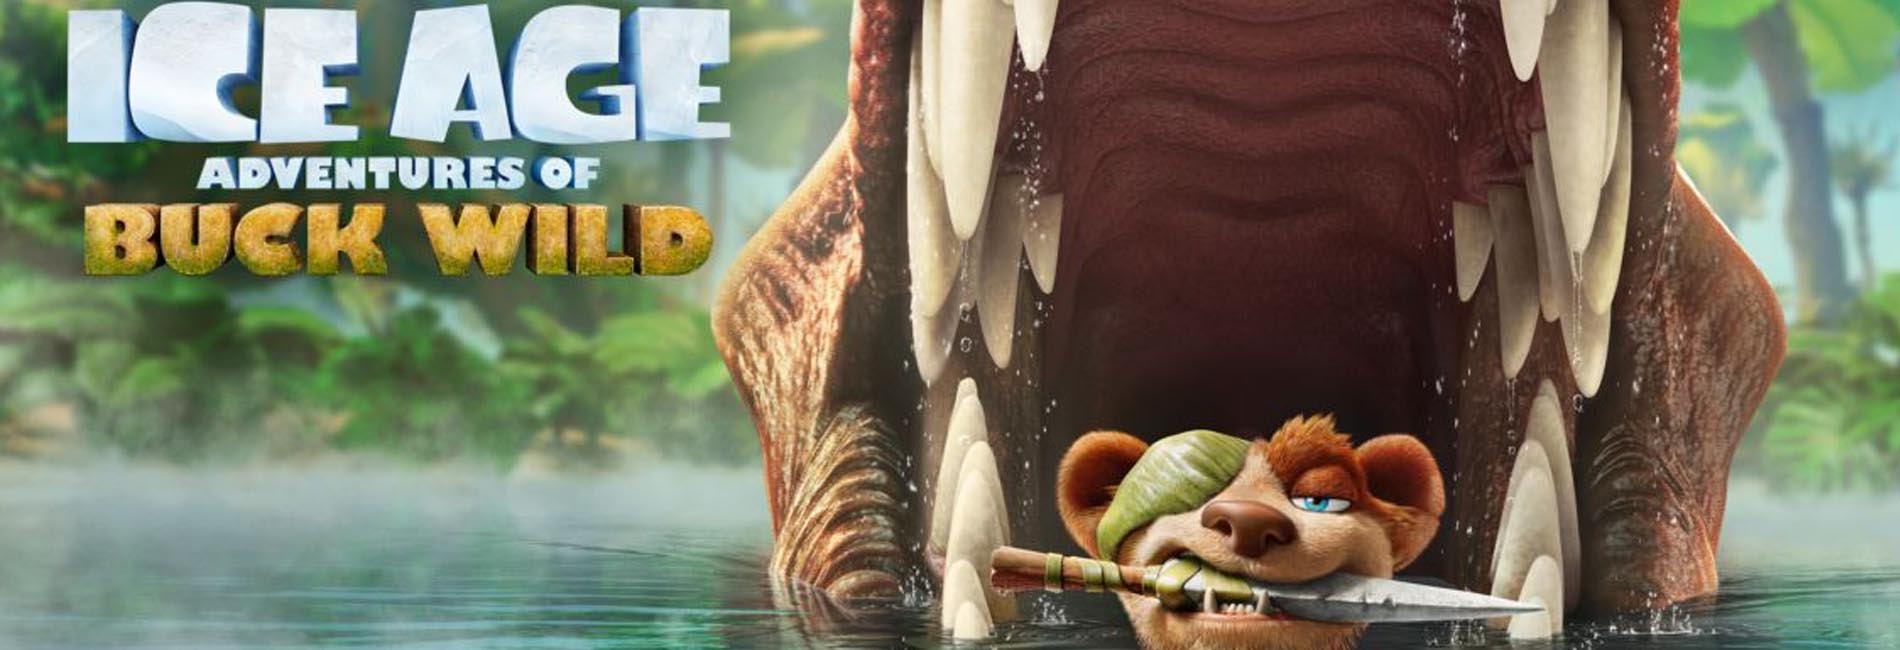 The Ice Age Adventures of Buck Wild-کارتونت